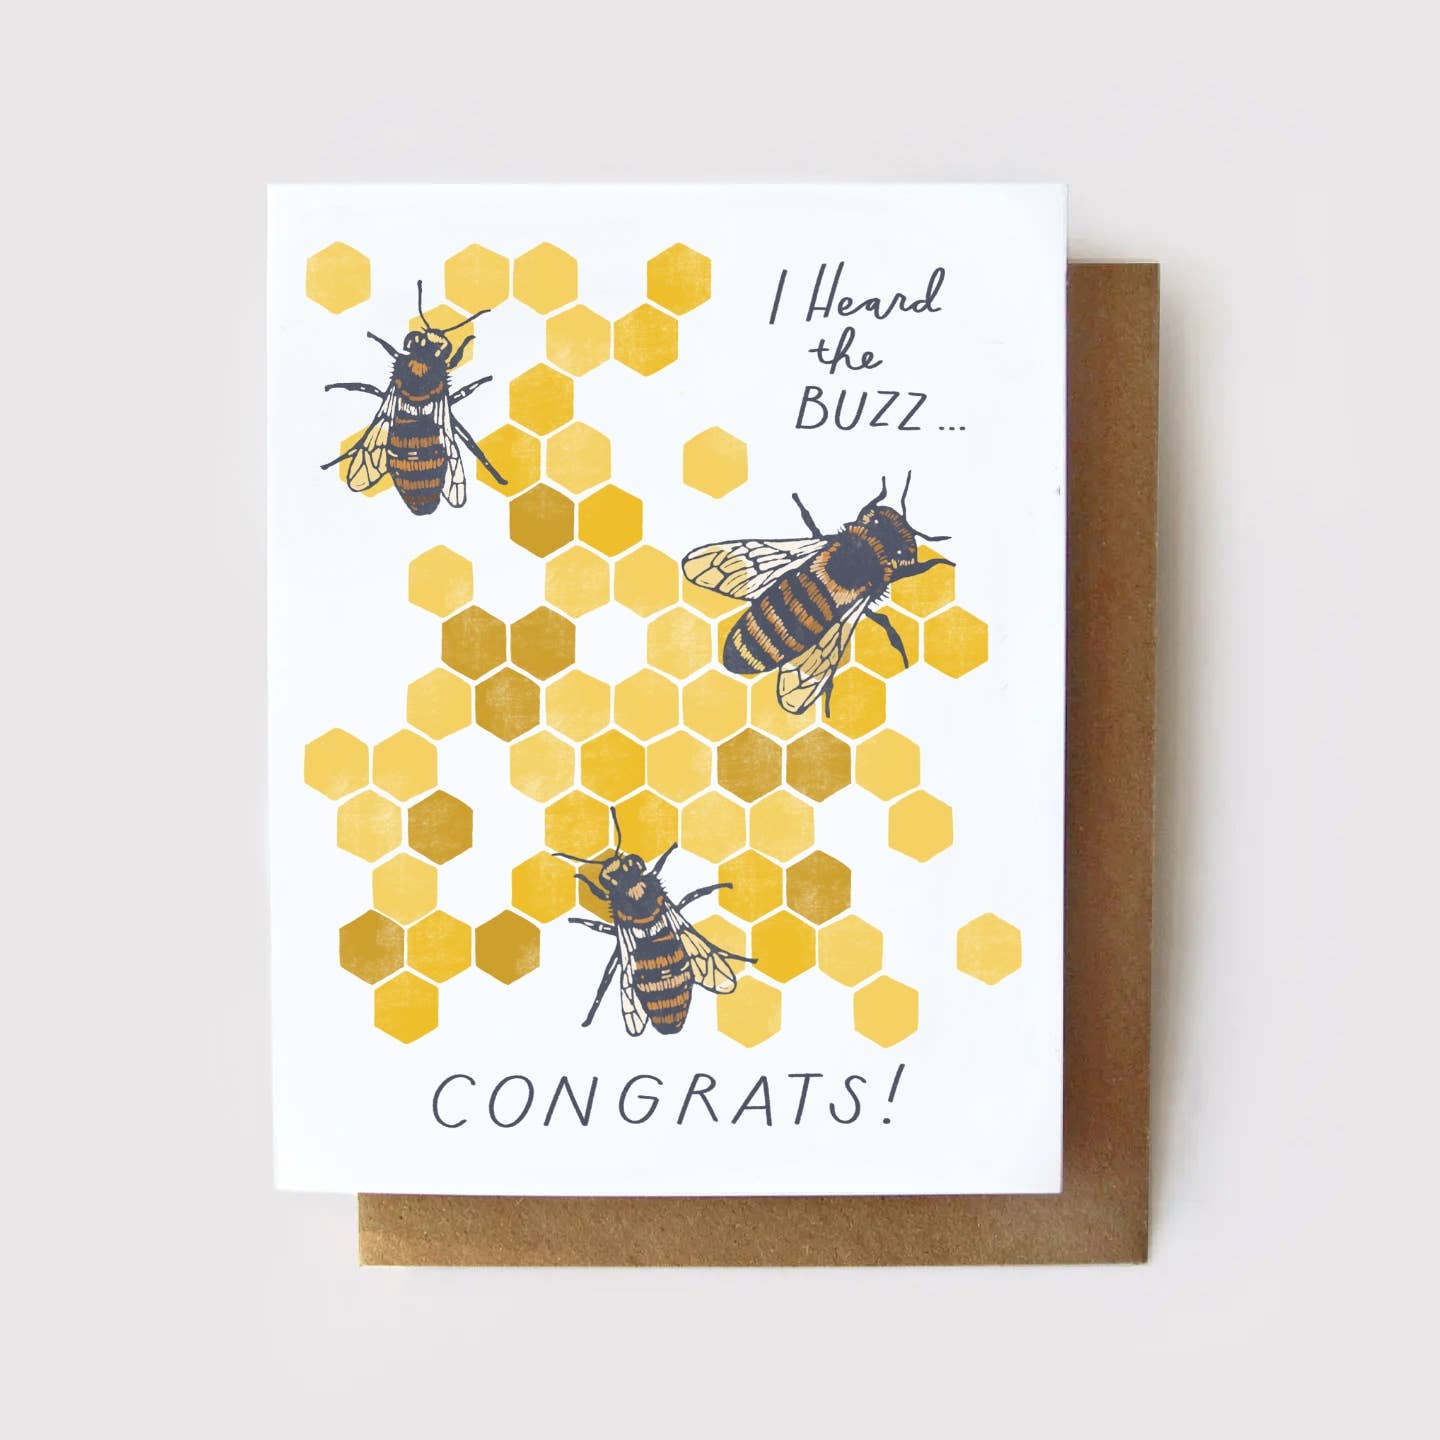 Heard the Buzz Card by Root & Branch Paper Co.